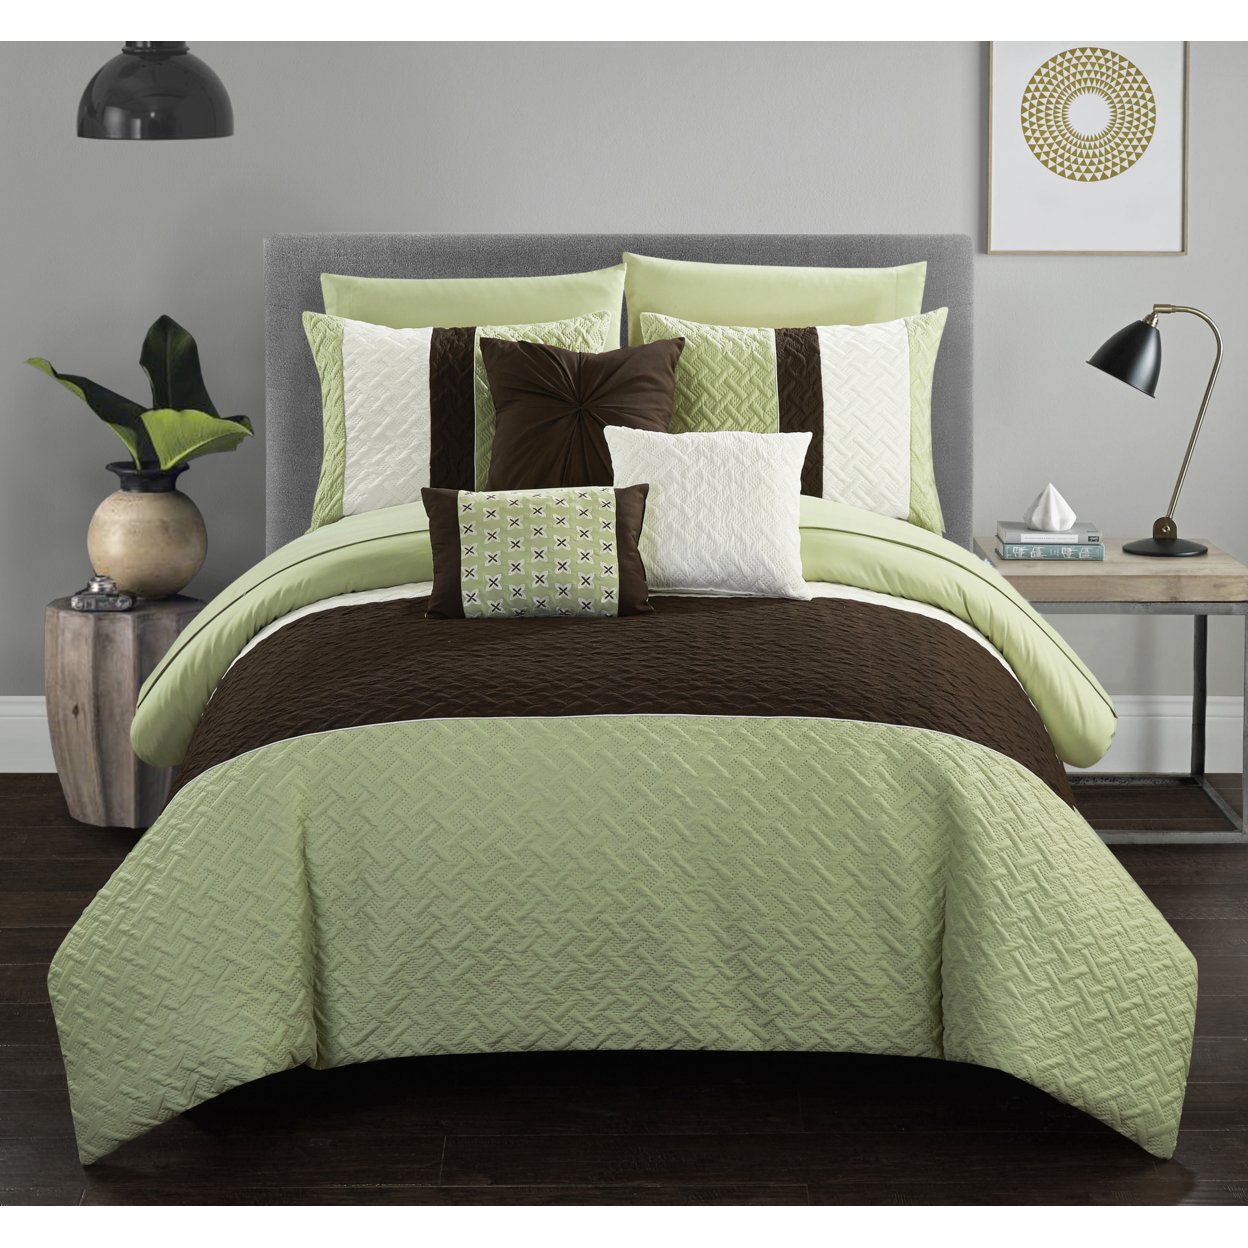 Chic Home Shaila 10 or 8 Piece Comforter Set Color Block Quilted Embroidered Design Bed in a Bag Bedding - Green, Queen